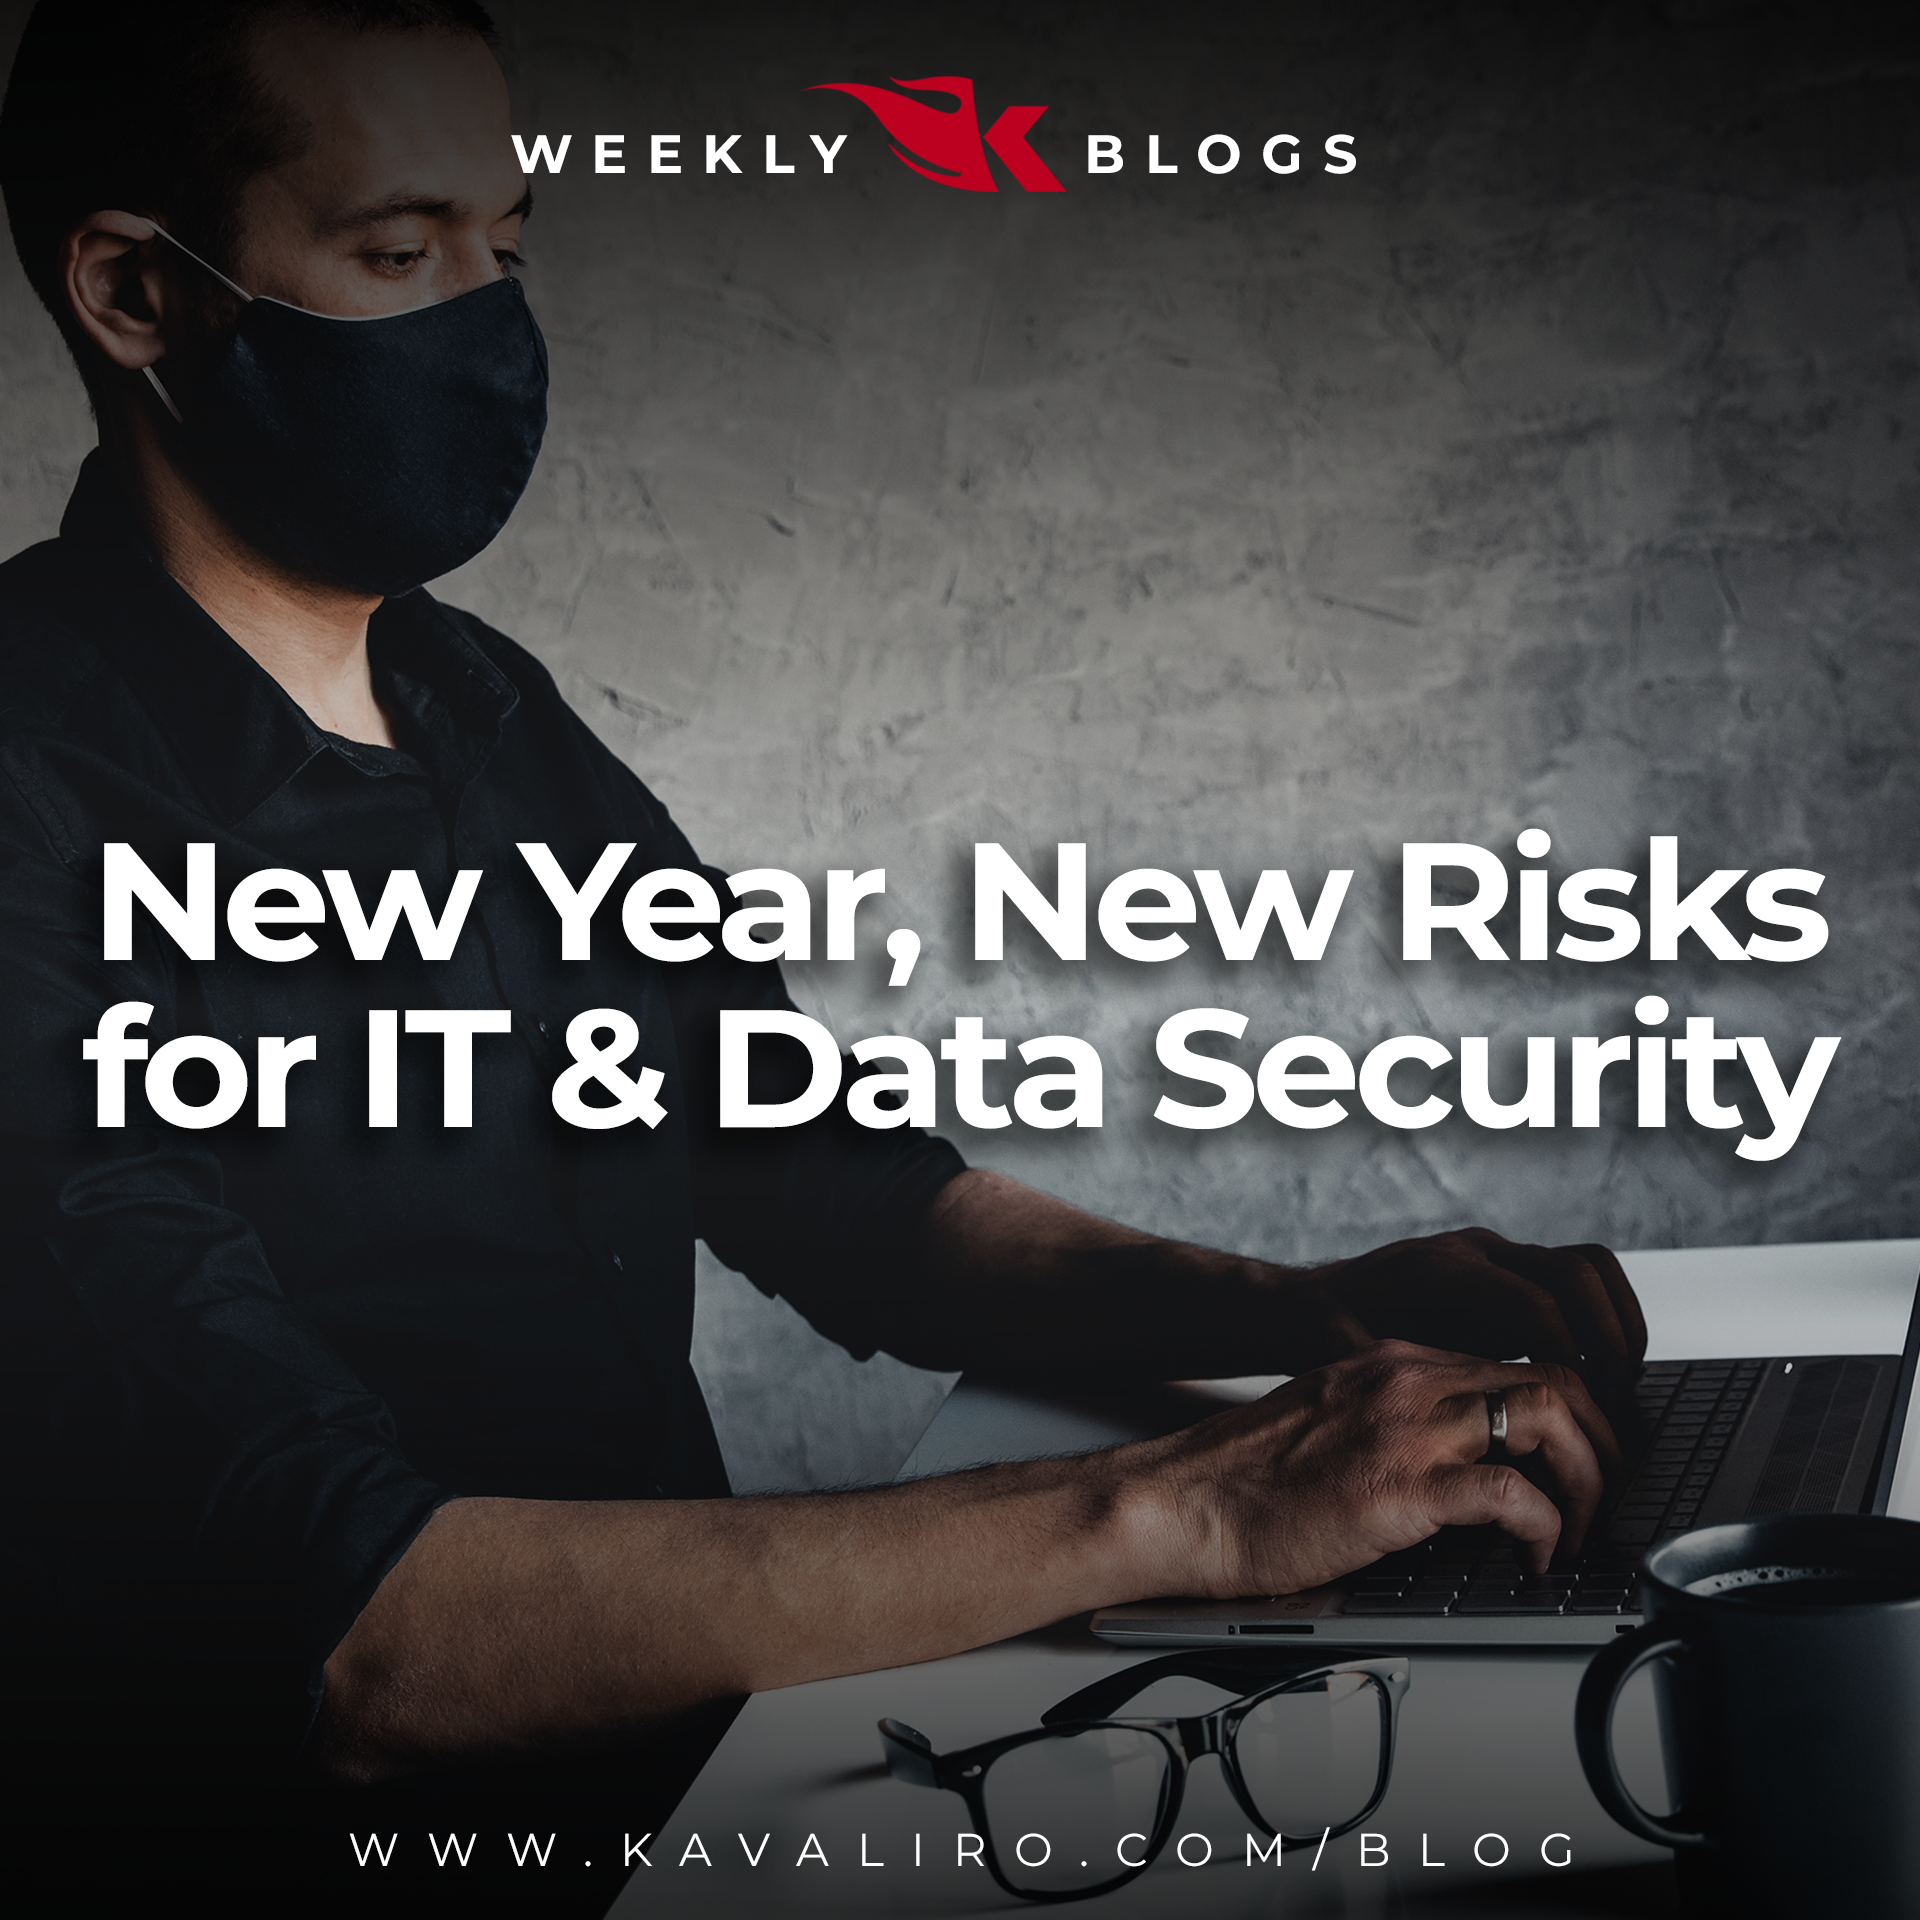 New Year, New Risks for IT & Data Security